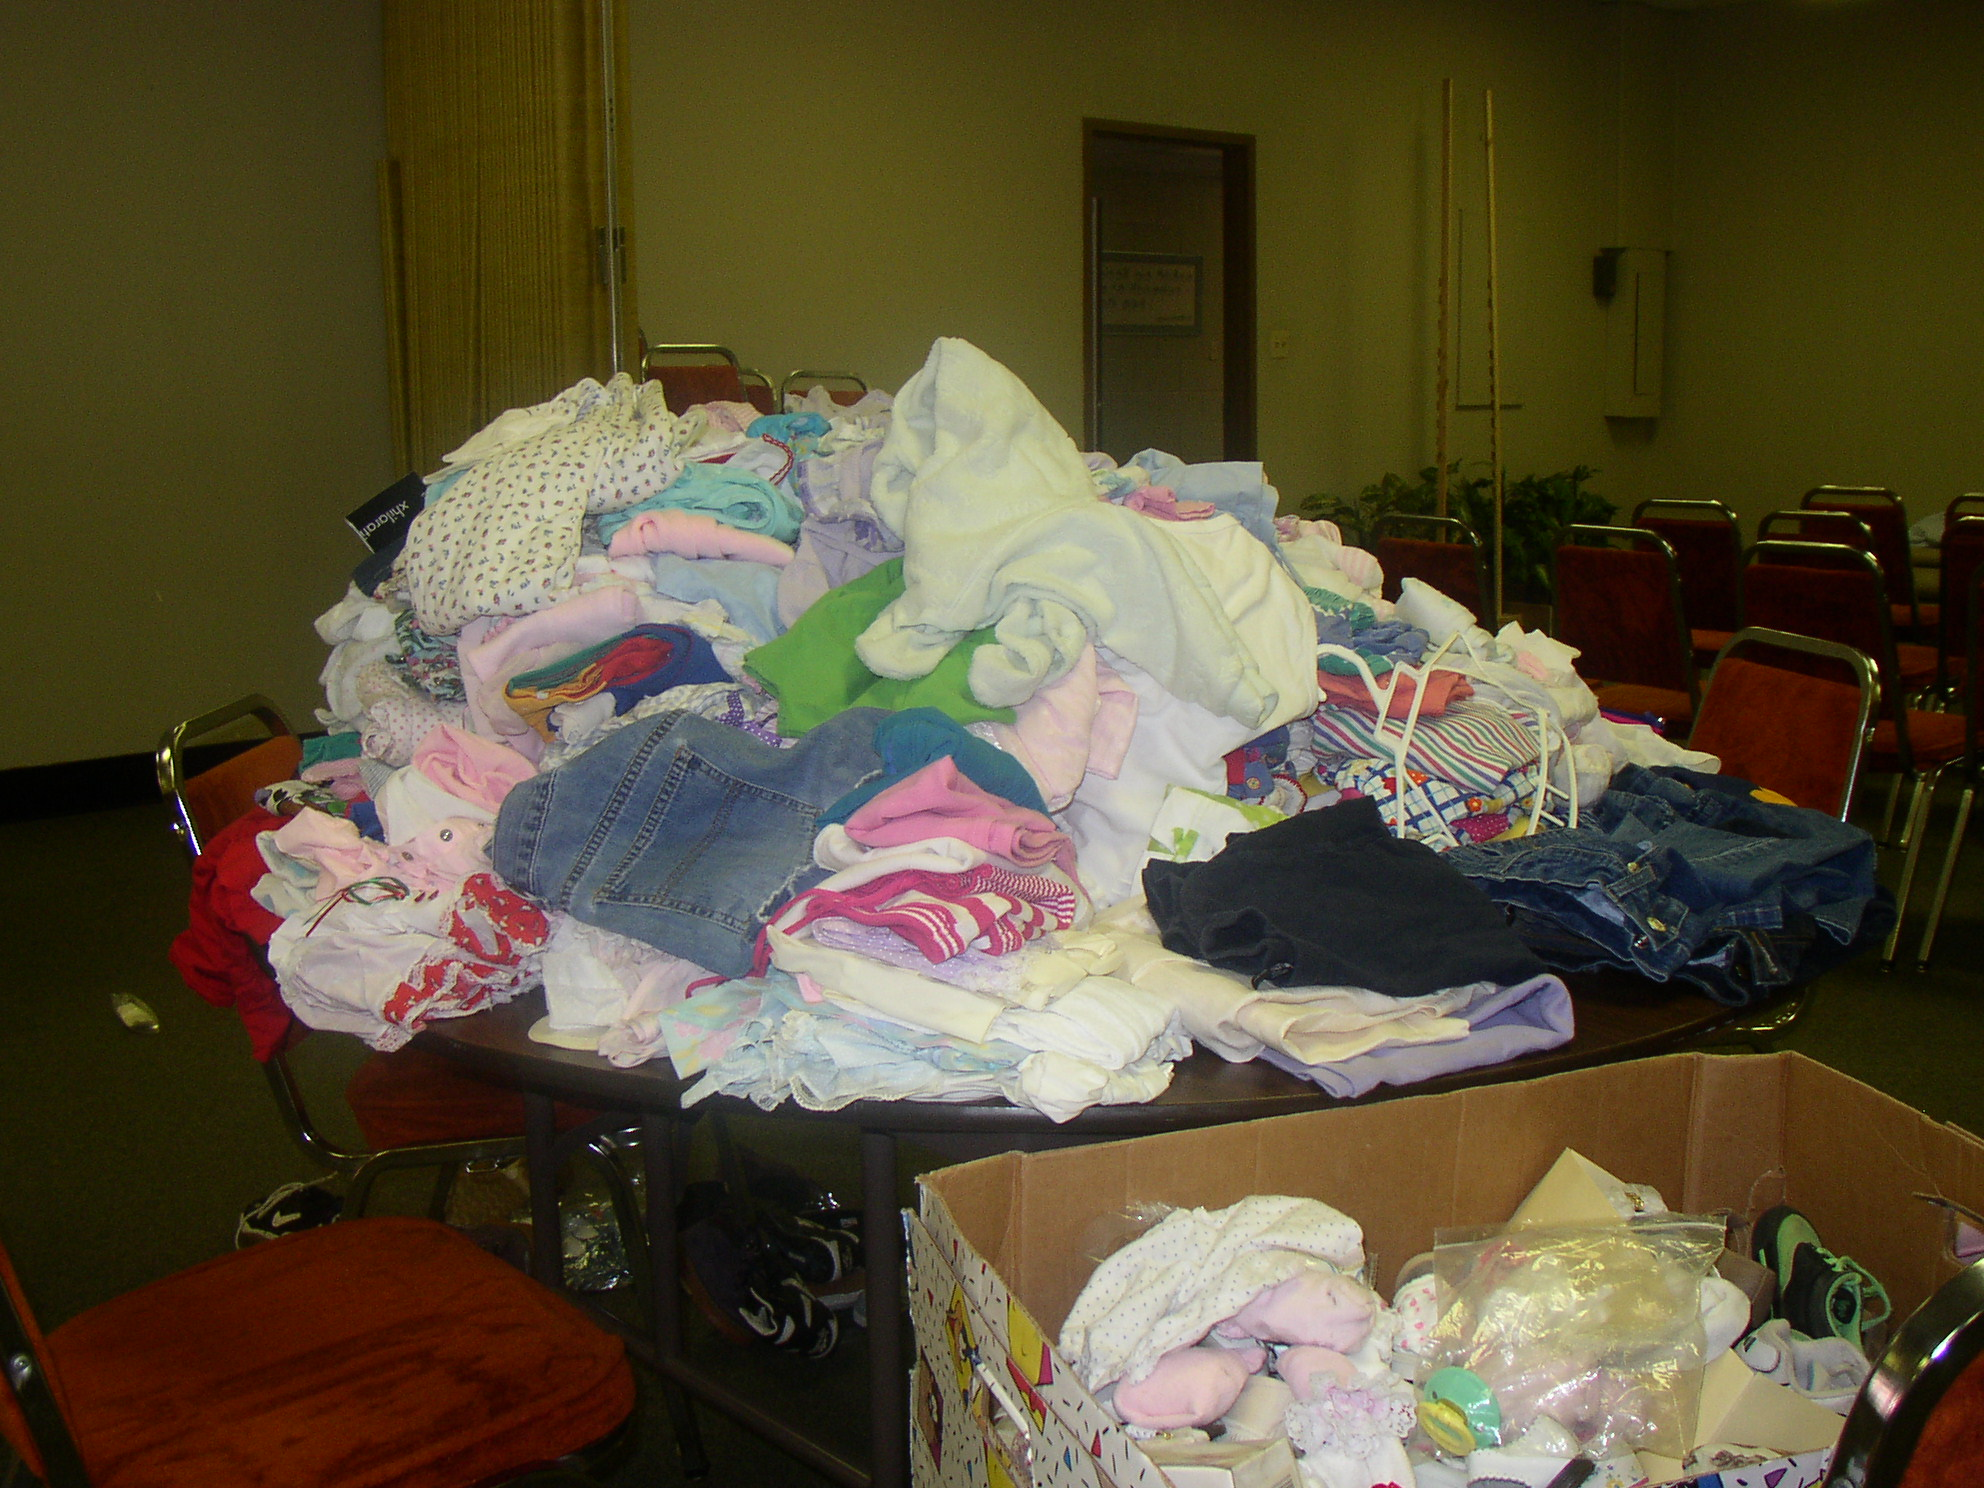 Photo of a mountain of donated clothing and toiletries.